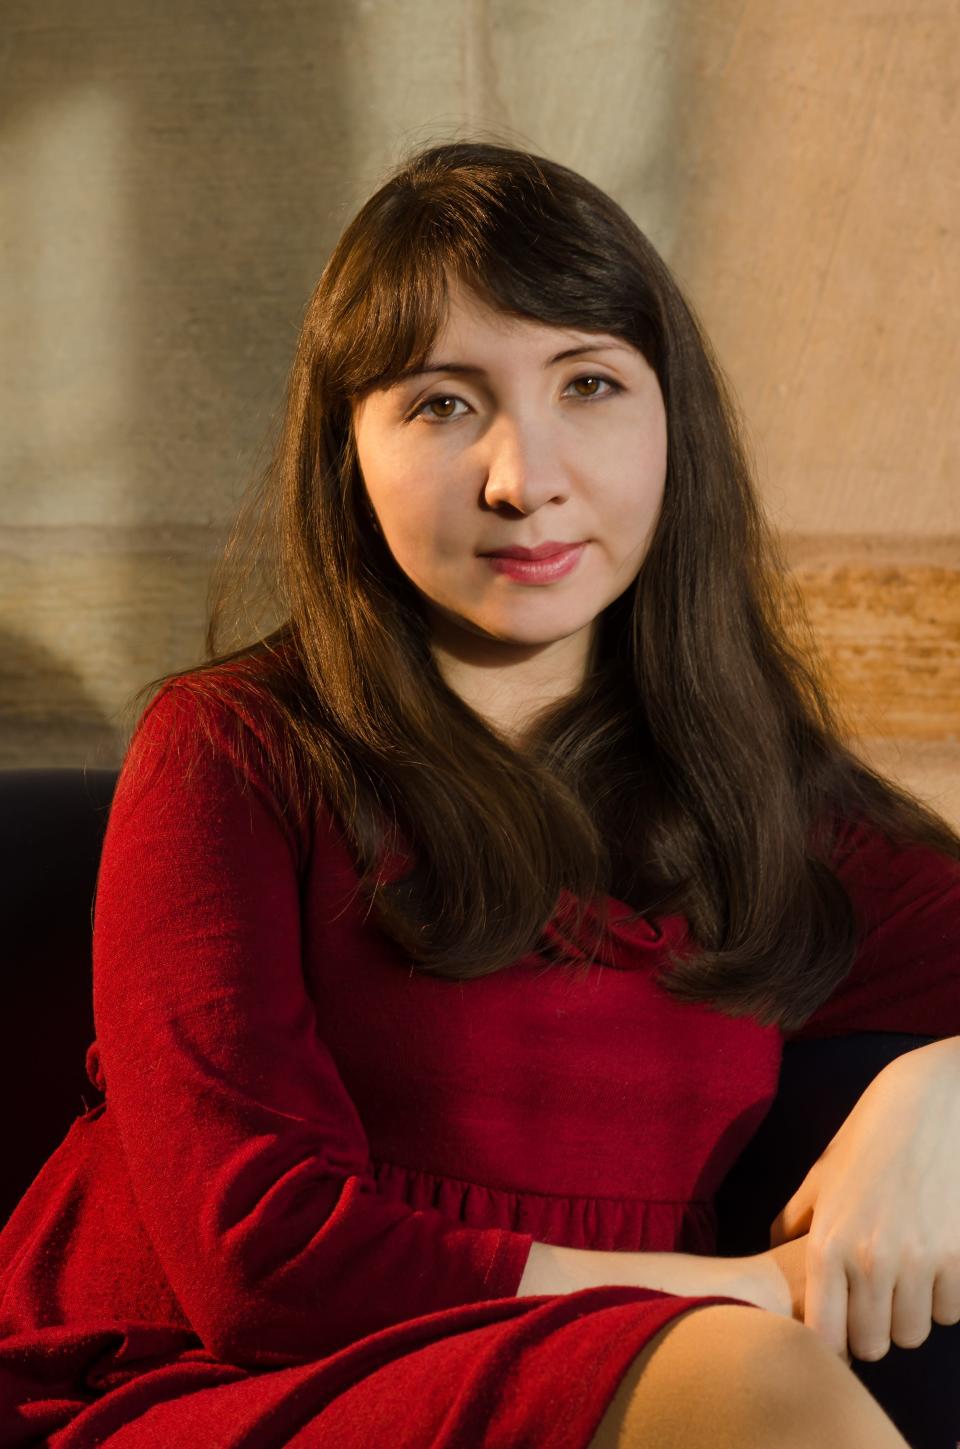 As FSU assistant professor of composition and director of Polymorphia, Liliya Ugay is primarily a composer and focuses her energy on creating new symphonic pieces.